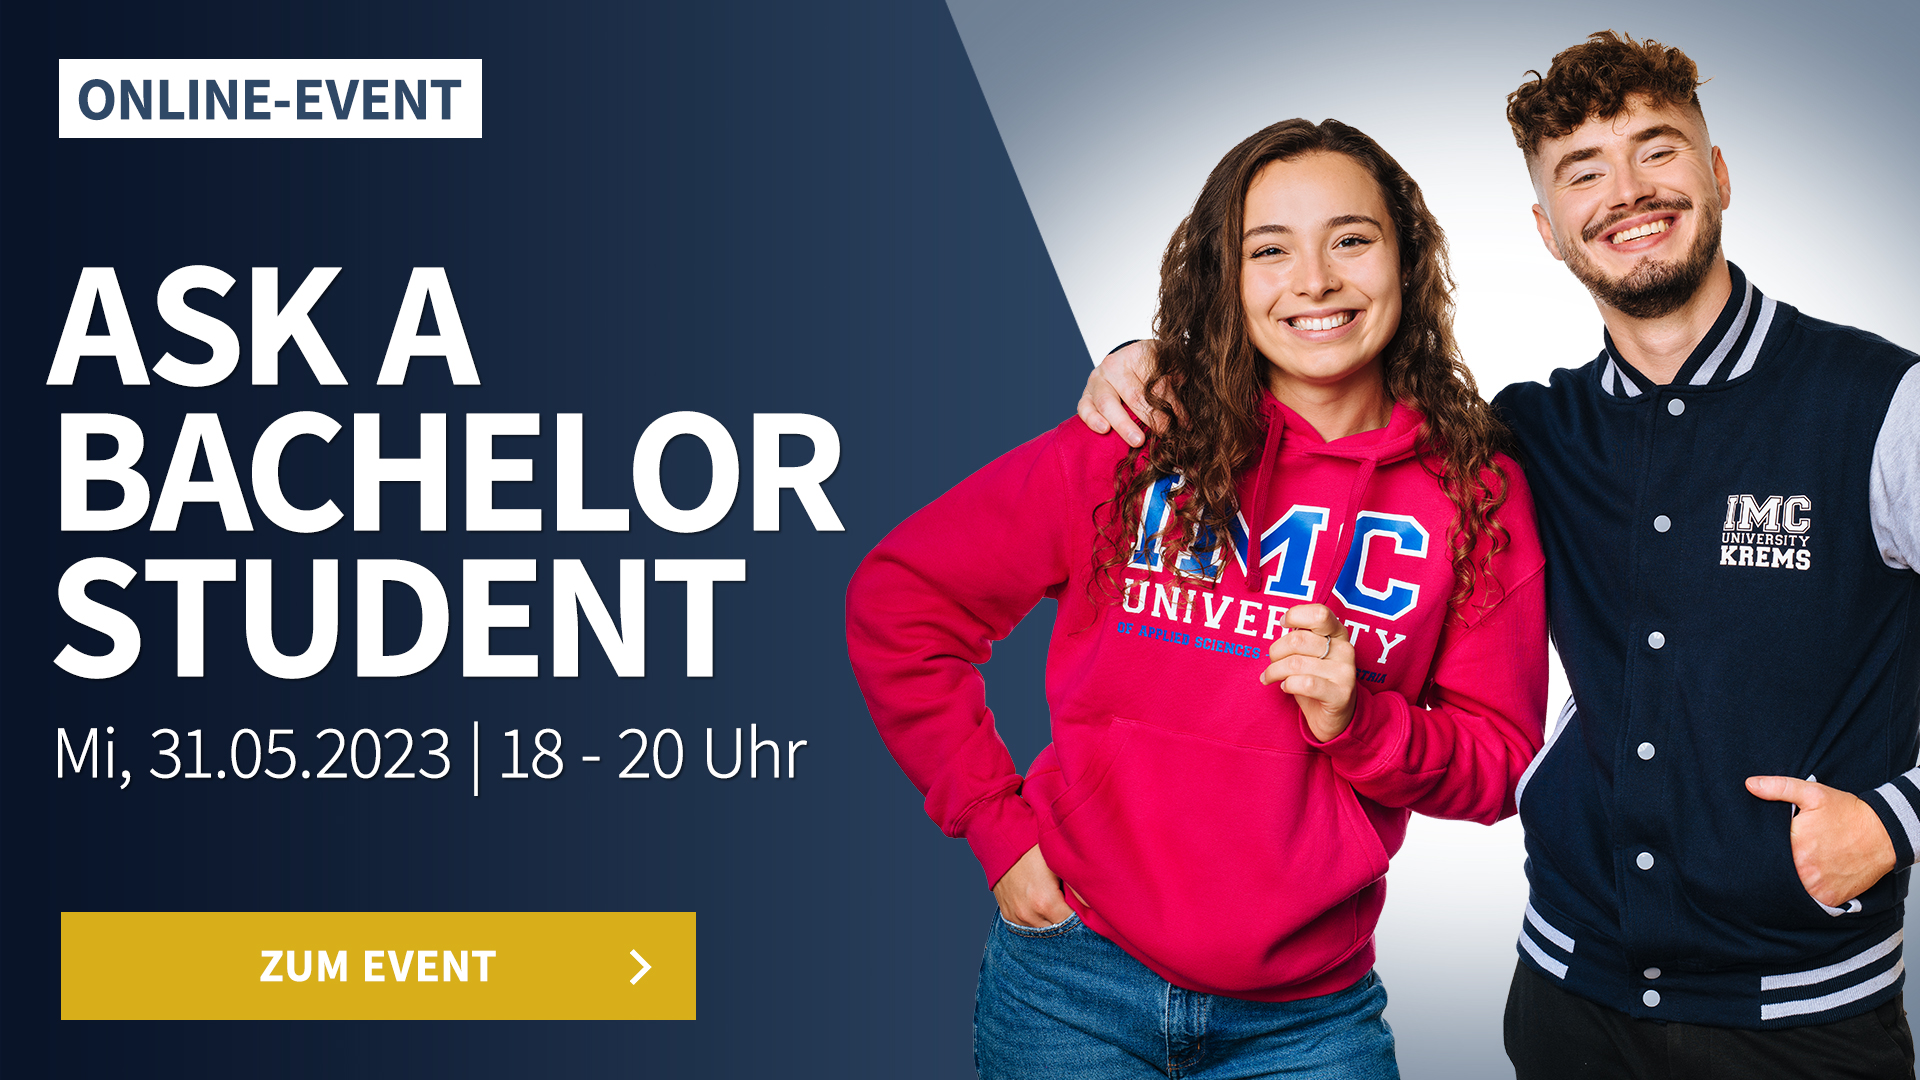 Ask a Bachelor Student, Mittwoch 31.05.2023, 18:00 - 20:00 Uhr